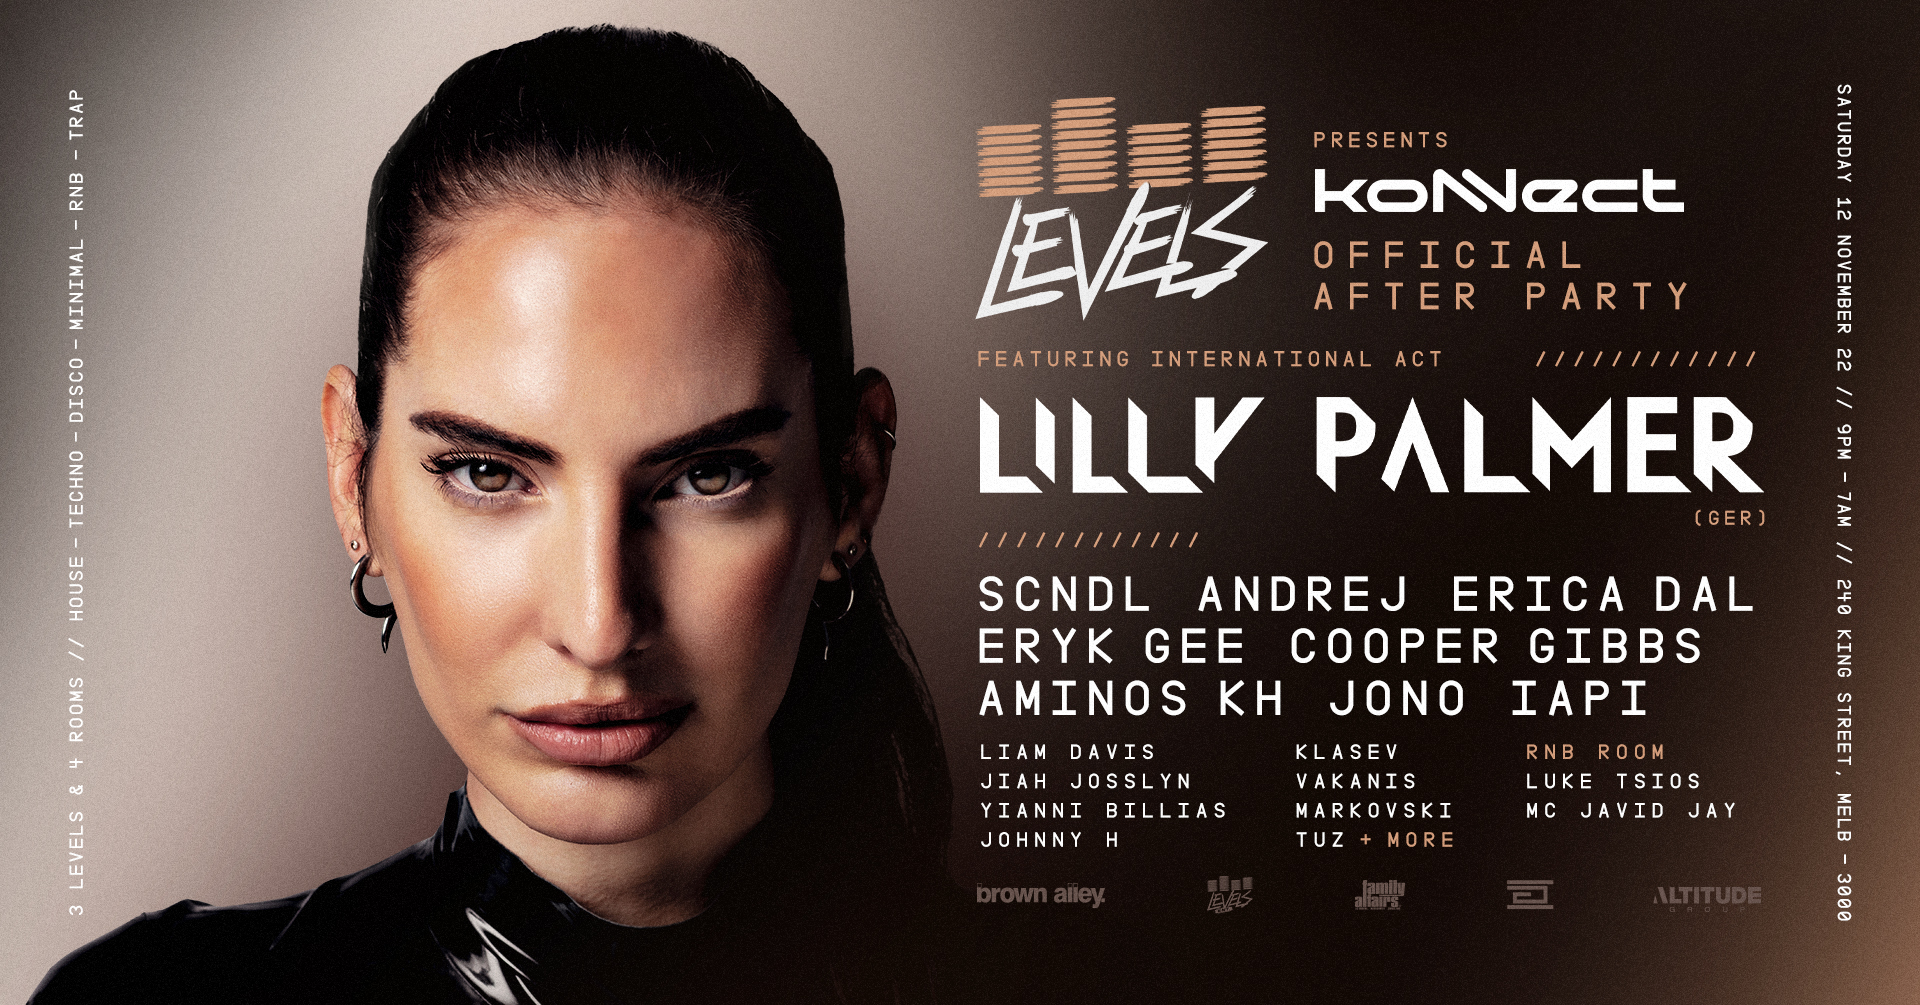 LEVELS - KONNECT AFTER PARTY FT. LILLY PALMER